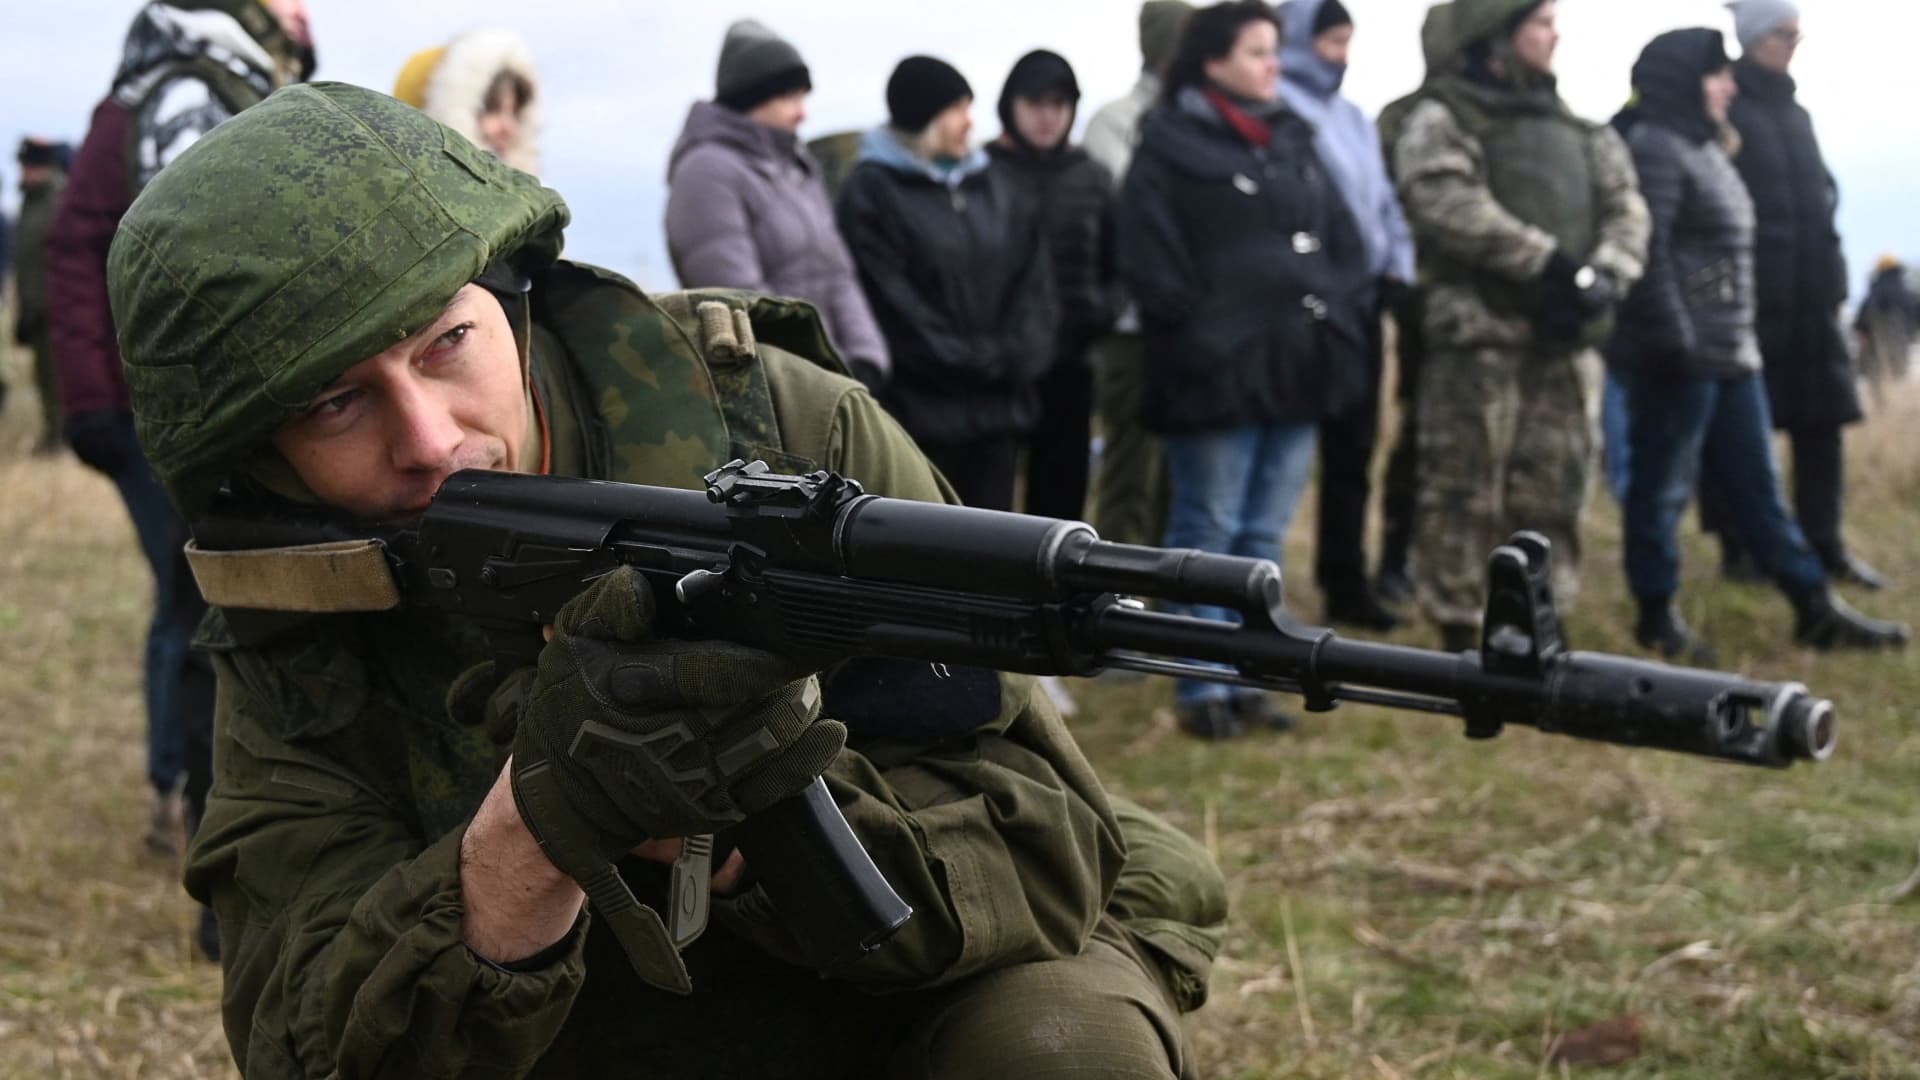 A man points a rifle during a combat training session for civilians organized by local authorities at a range in Rostov Region, Russia October 21, 2022.